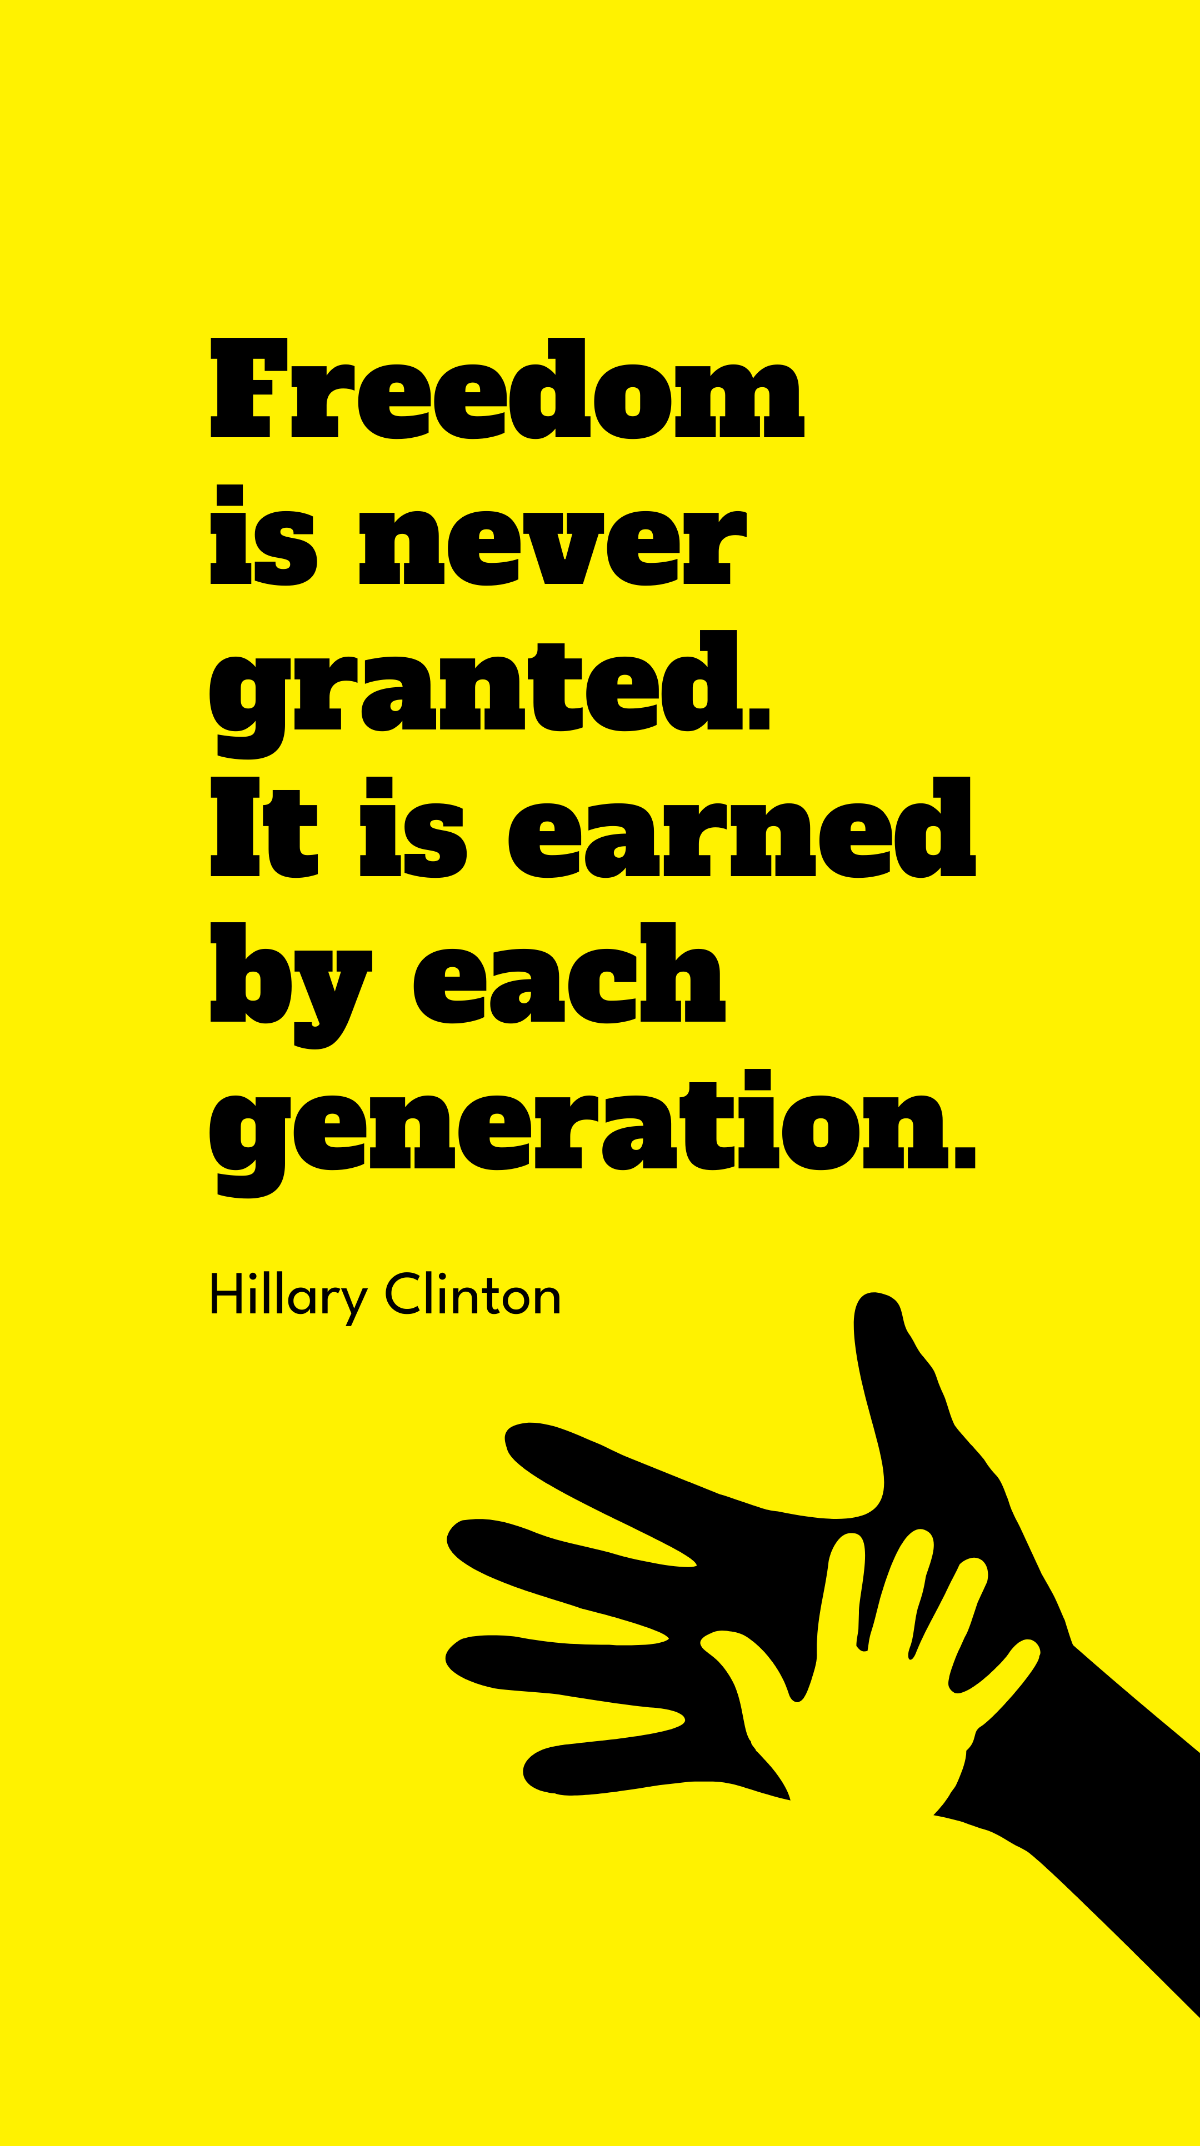 Hillary Clinton - Freedom is never granted. It is earned by each generation. Template